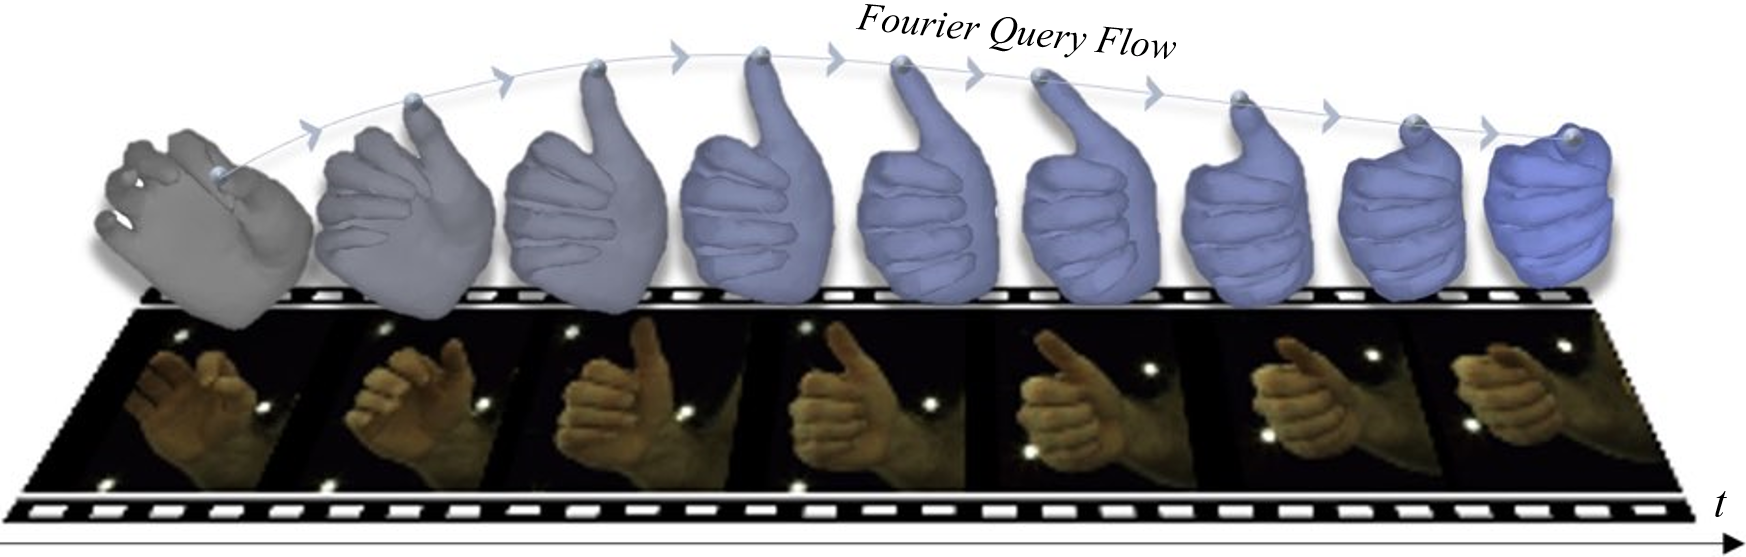 Fourier Hand Flow